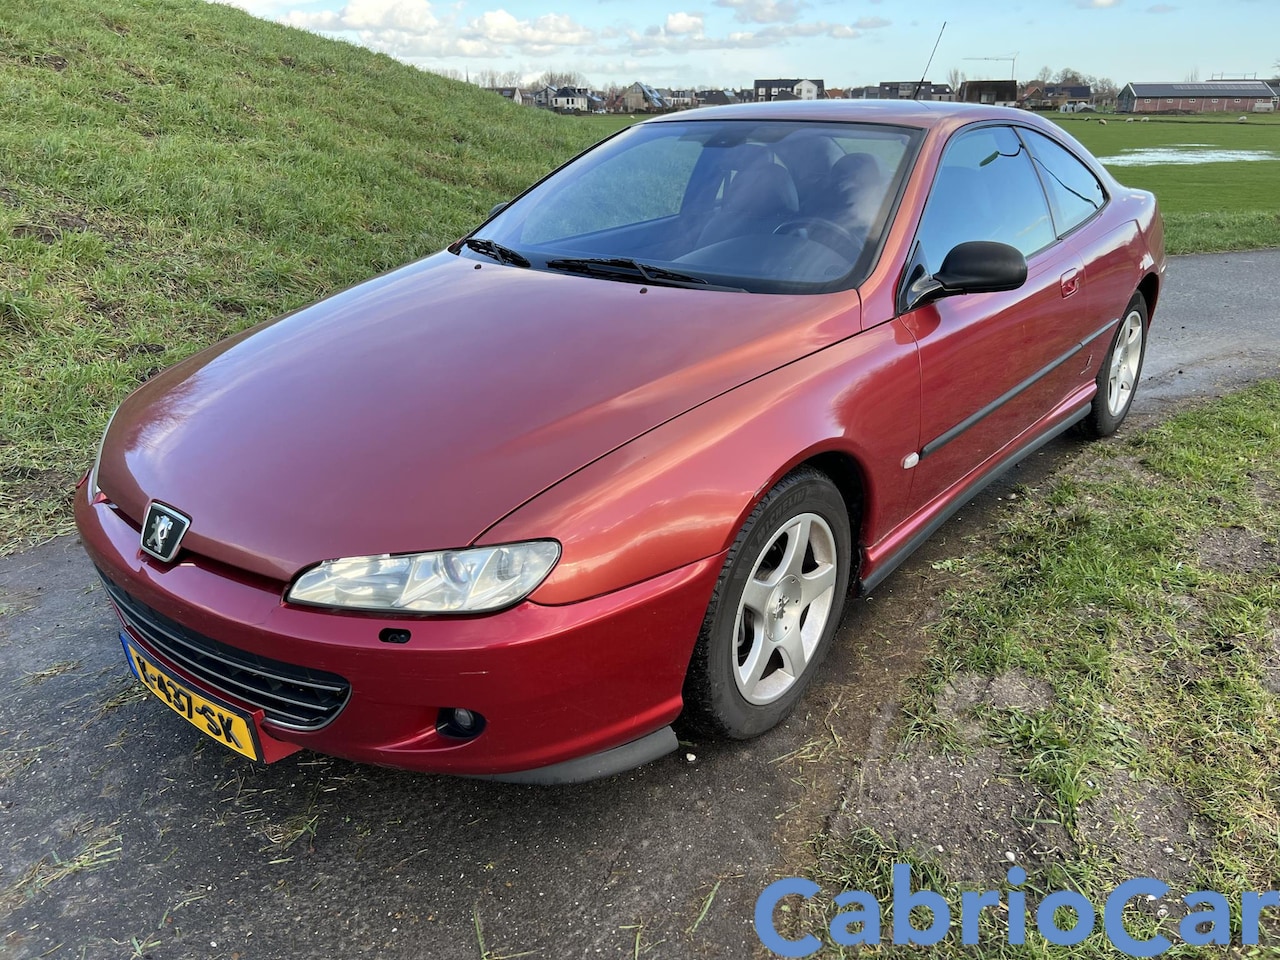 peugeot 406 coupe red red used – Search for your used car on the